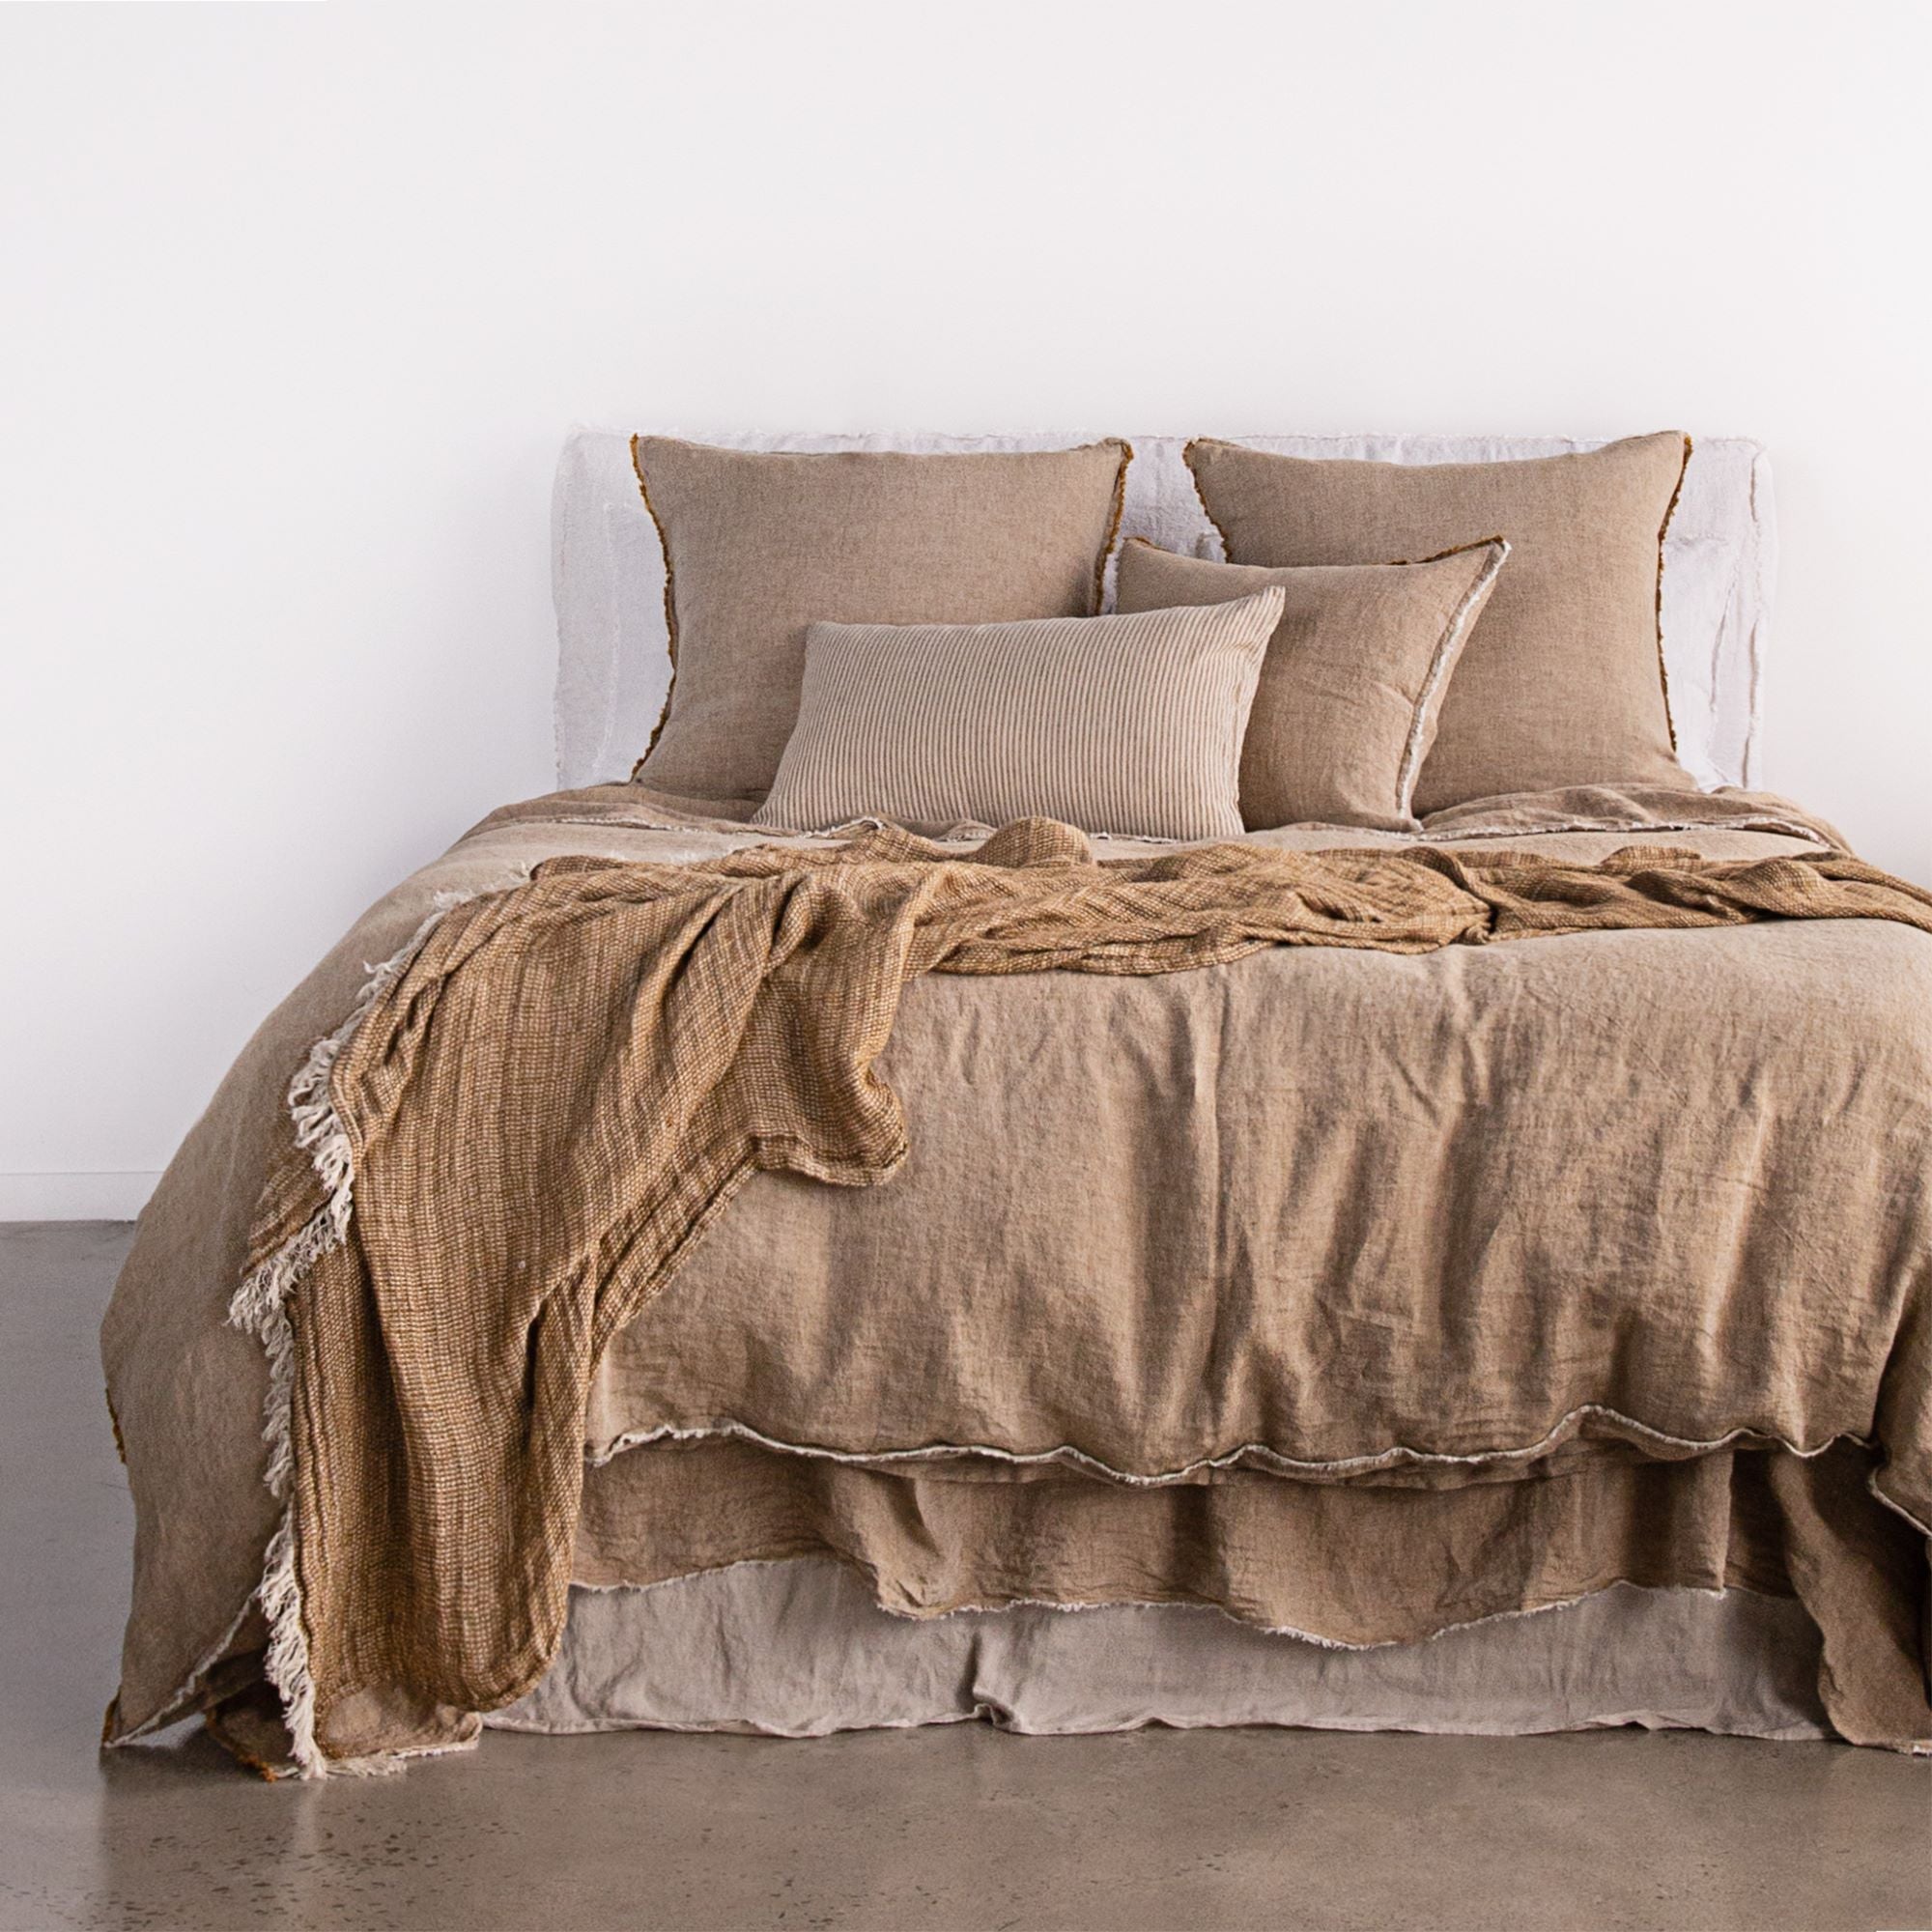 Linen Cushion & Cover | Rich Toffee | Hale Mercantile Co.